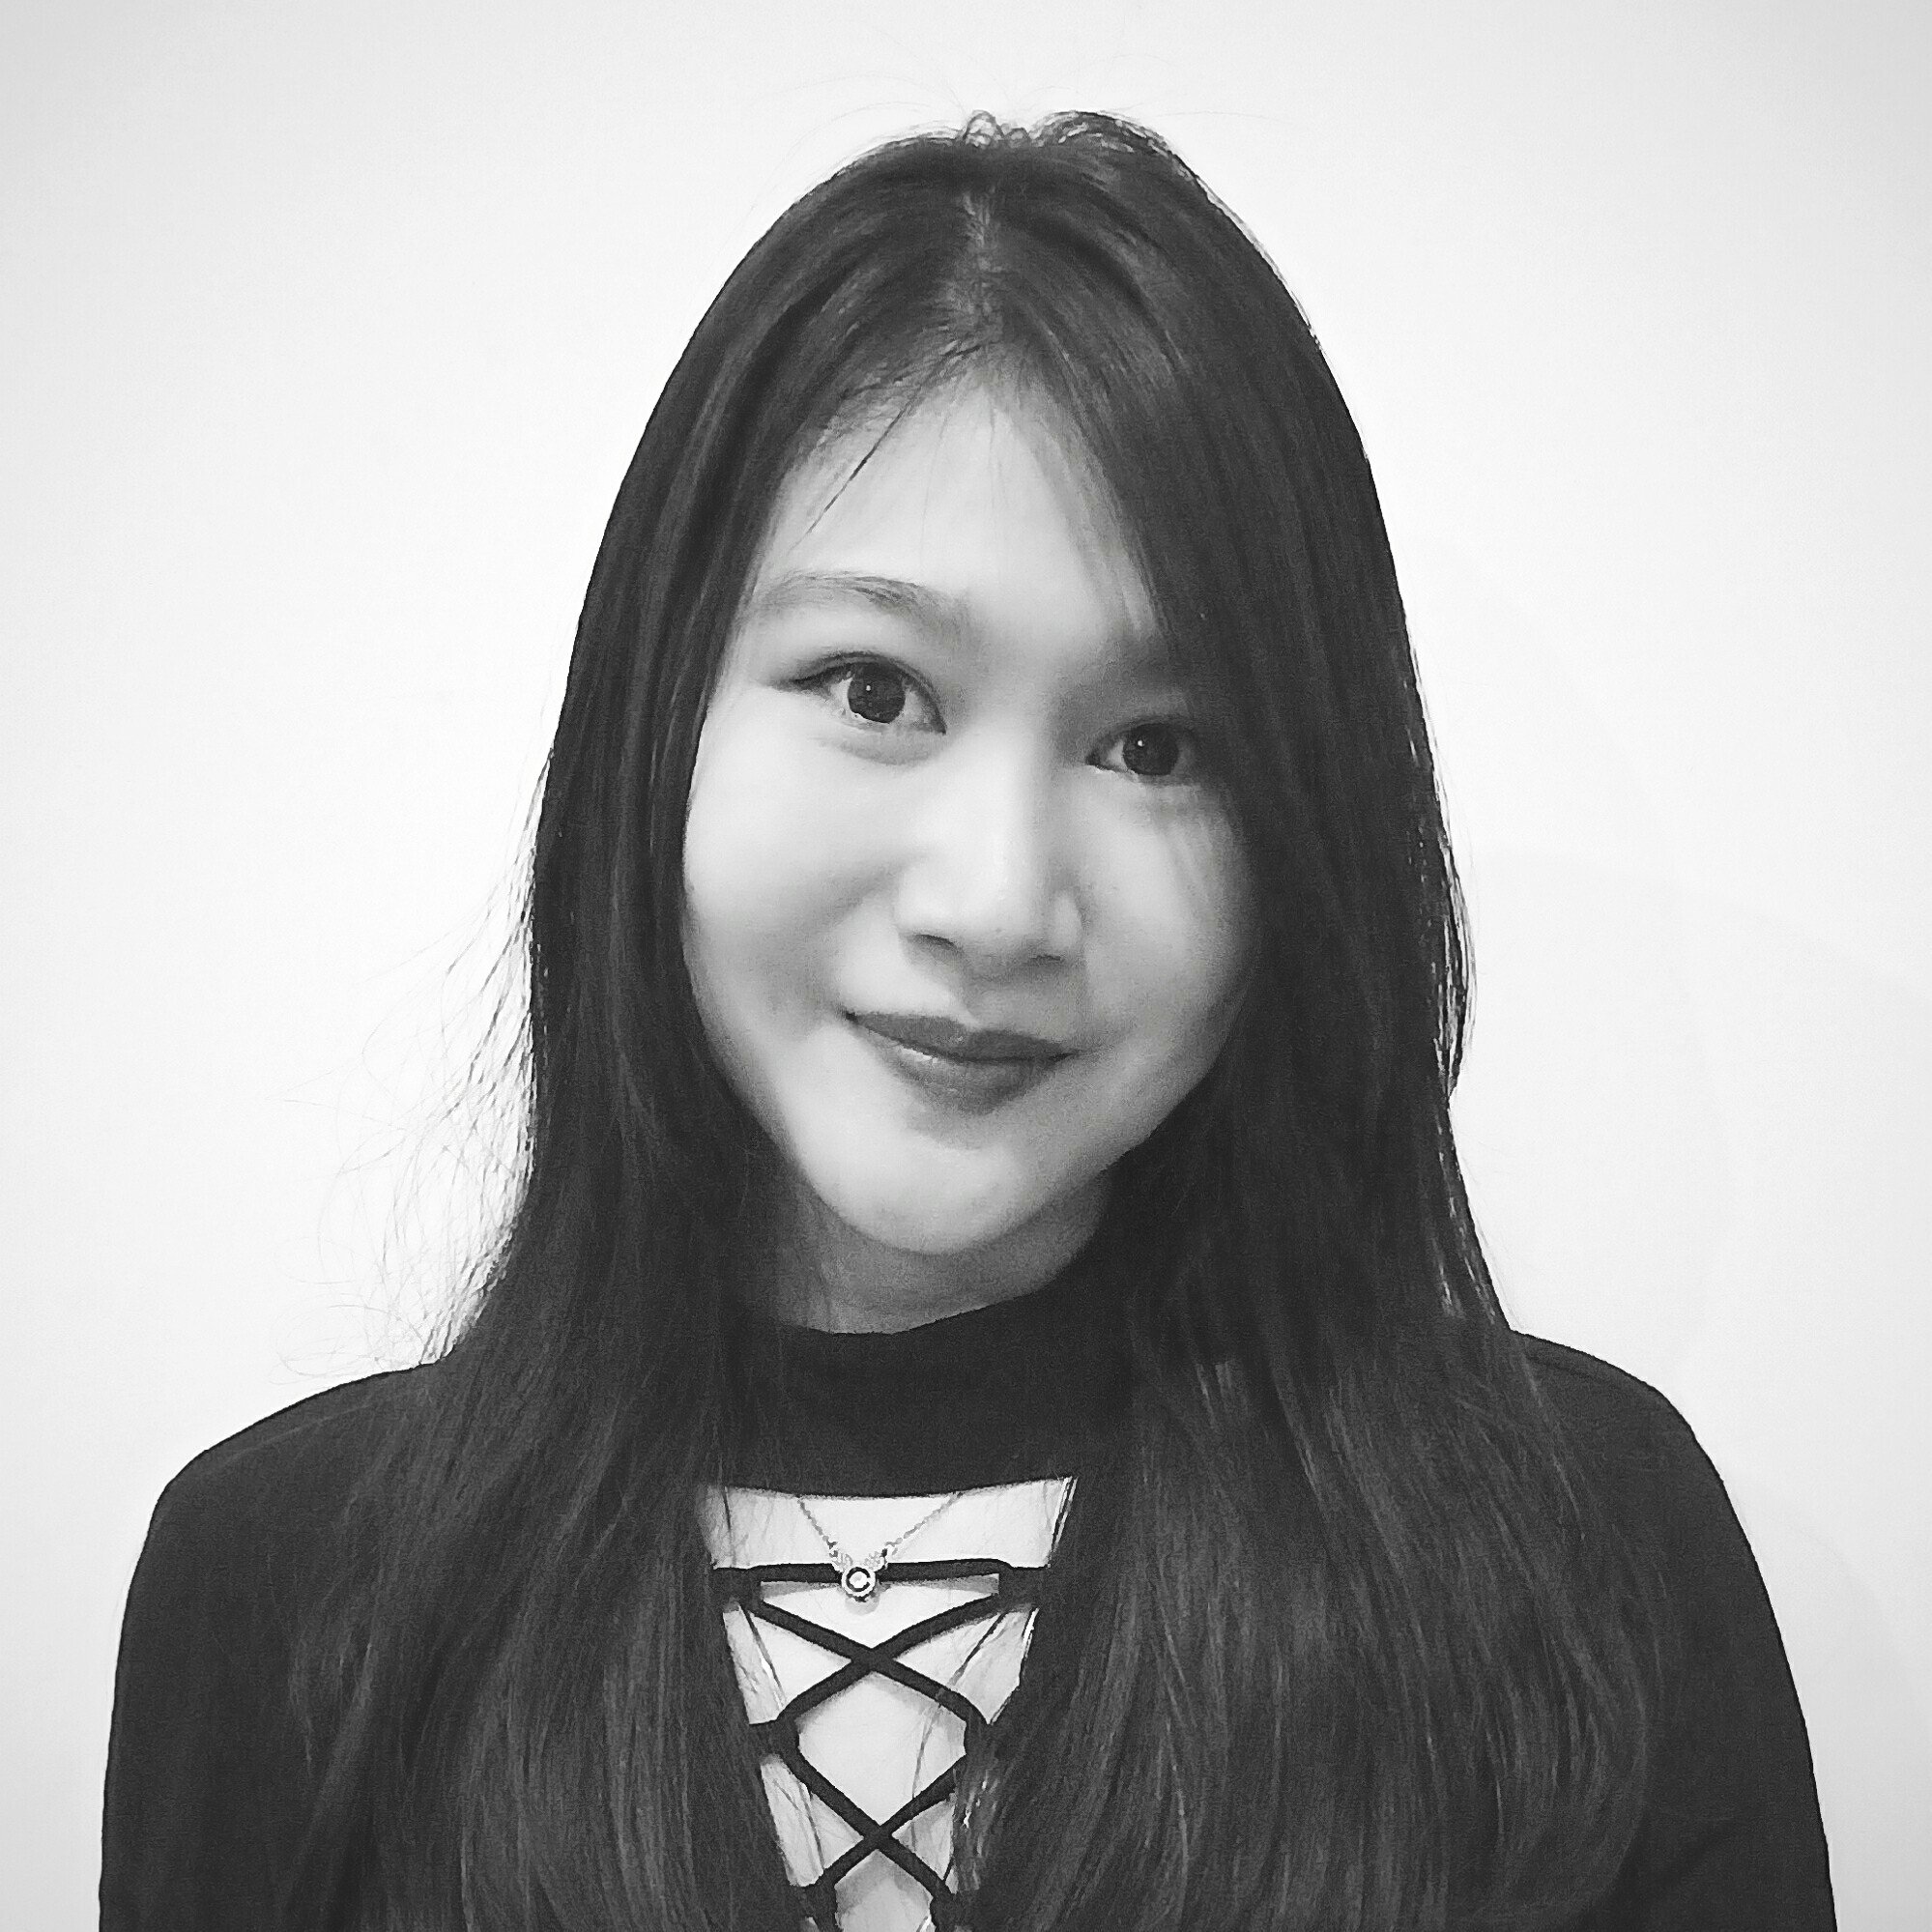 Cindy Winona, Assistant Account Manager - Melbourne & Jakarta